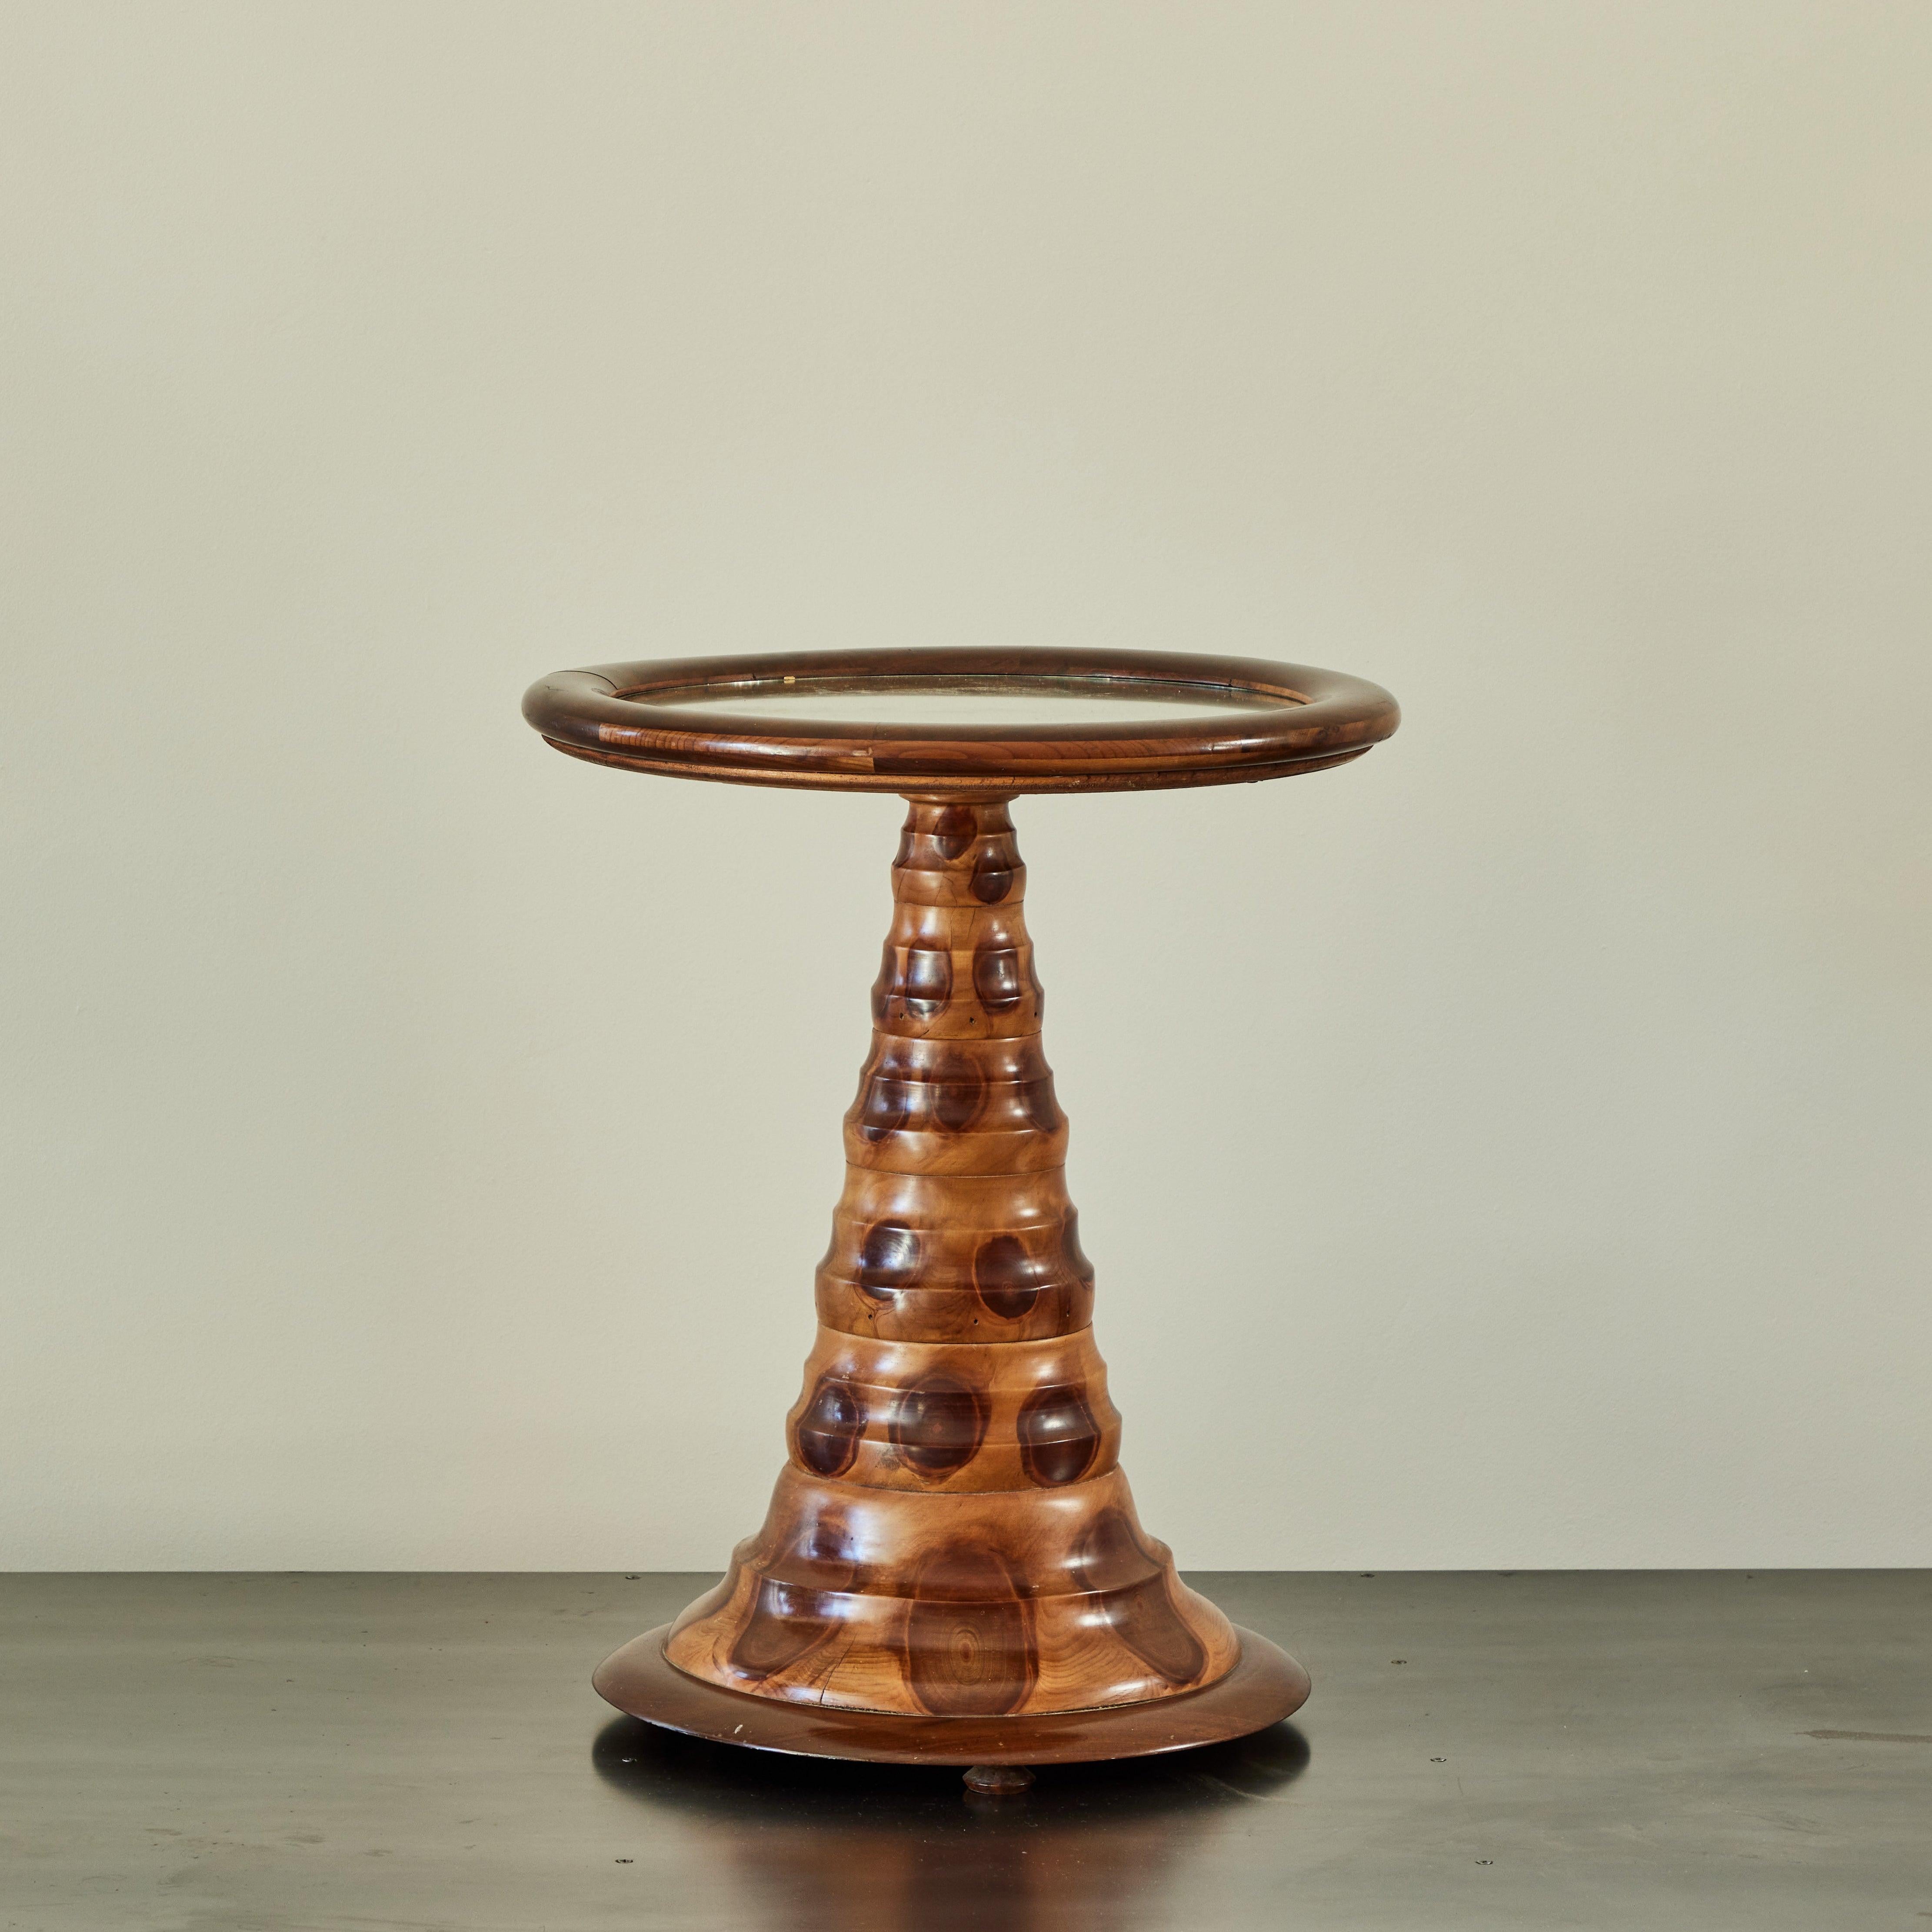 1930s Brazilian side or occasional table in exotic Araucaria Araucana wood, otherwise known as Monkey Puzzle Wood. With a circular mirrored top and lightly beveled rings accentuating the winged conical base, the piece has a sleek, yet organic